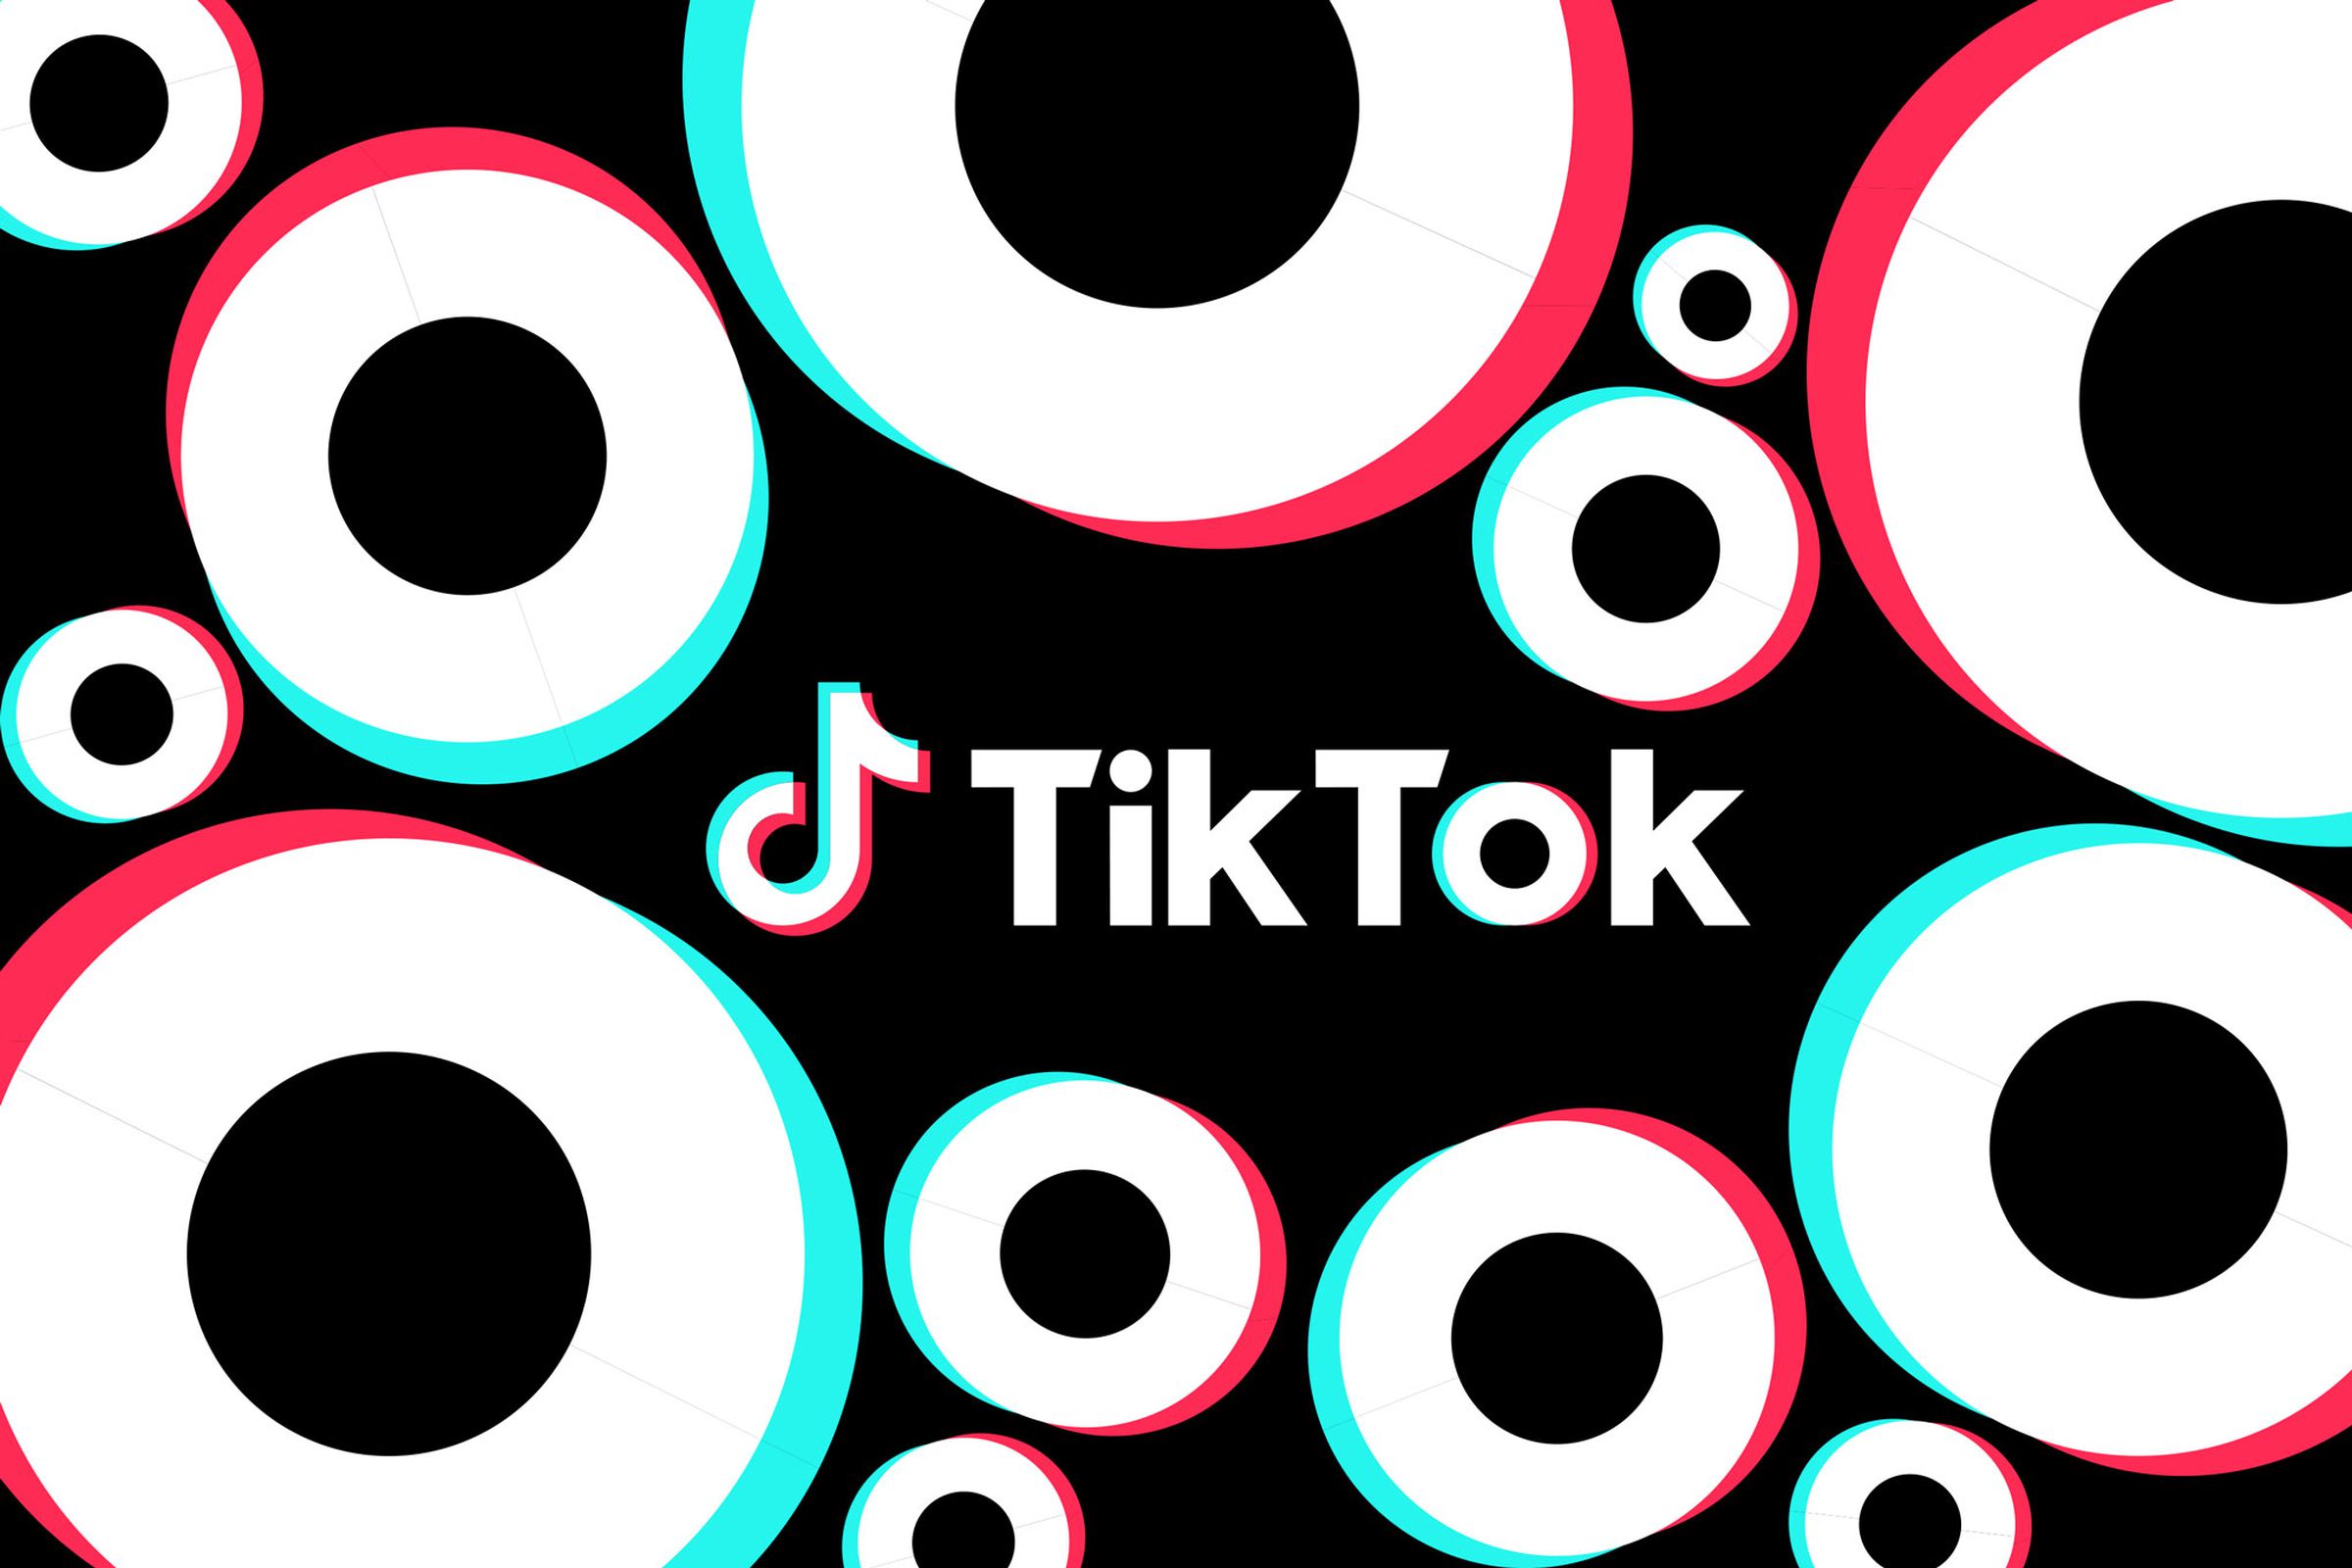 The TikTok logo on a black background with repeating geometric shapes